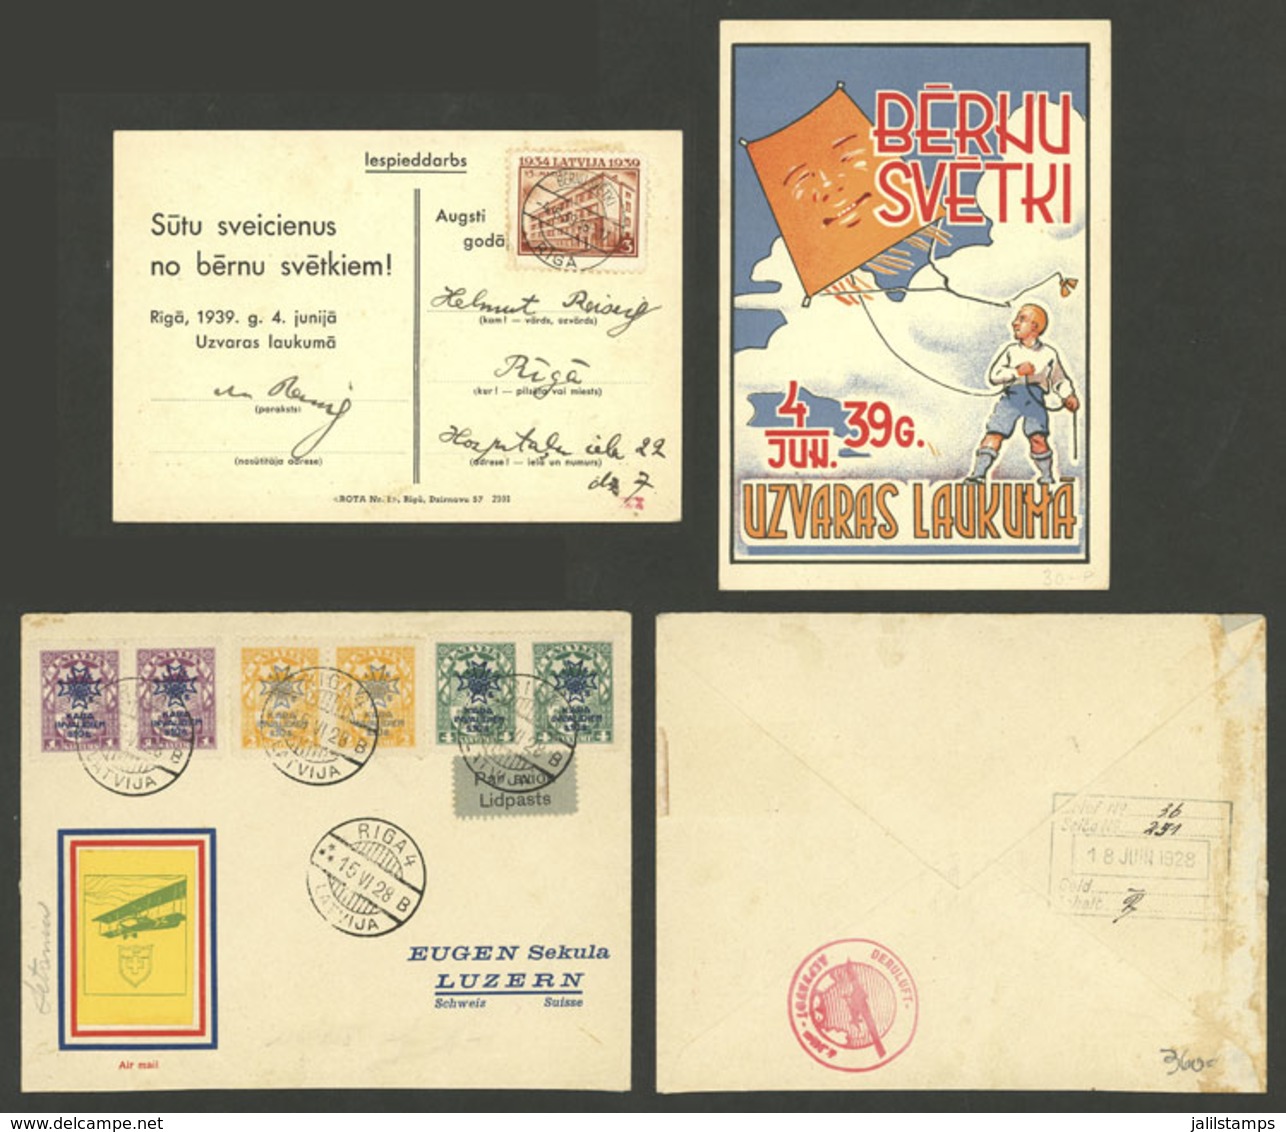 LATVIA: Cover Of 1928 And Card Of 1939, Interesting Marks And Frankings, VF Quality! - Lettonia